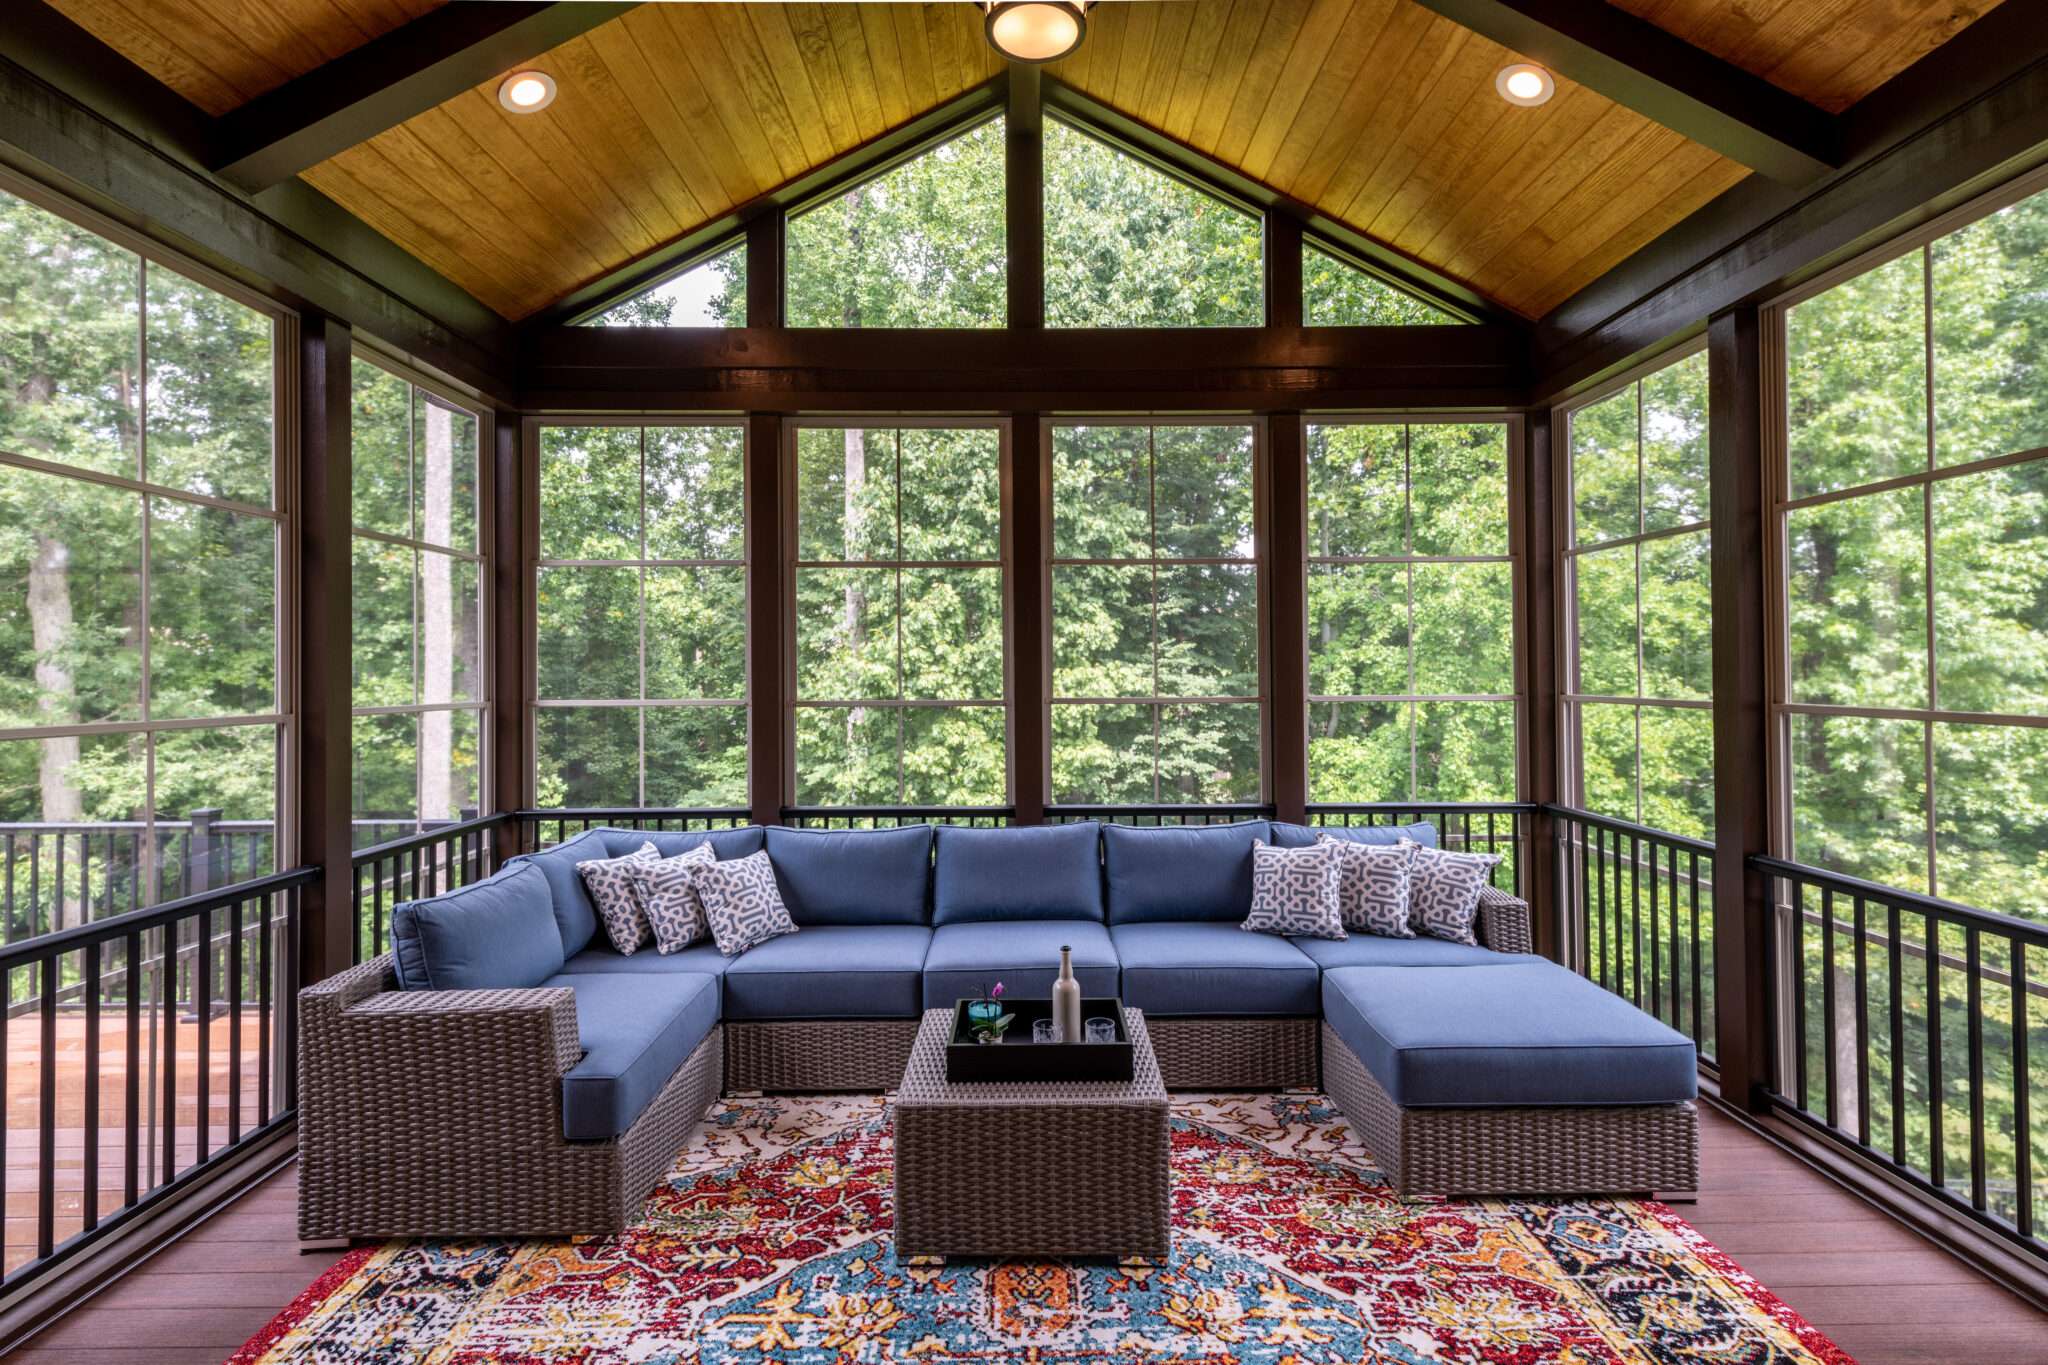 Glass sunroom with large windows and vaulted wood ceiling